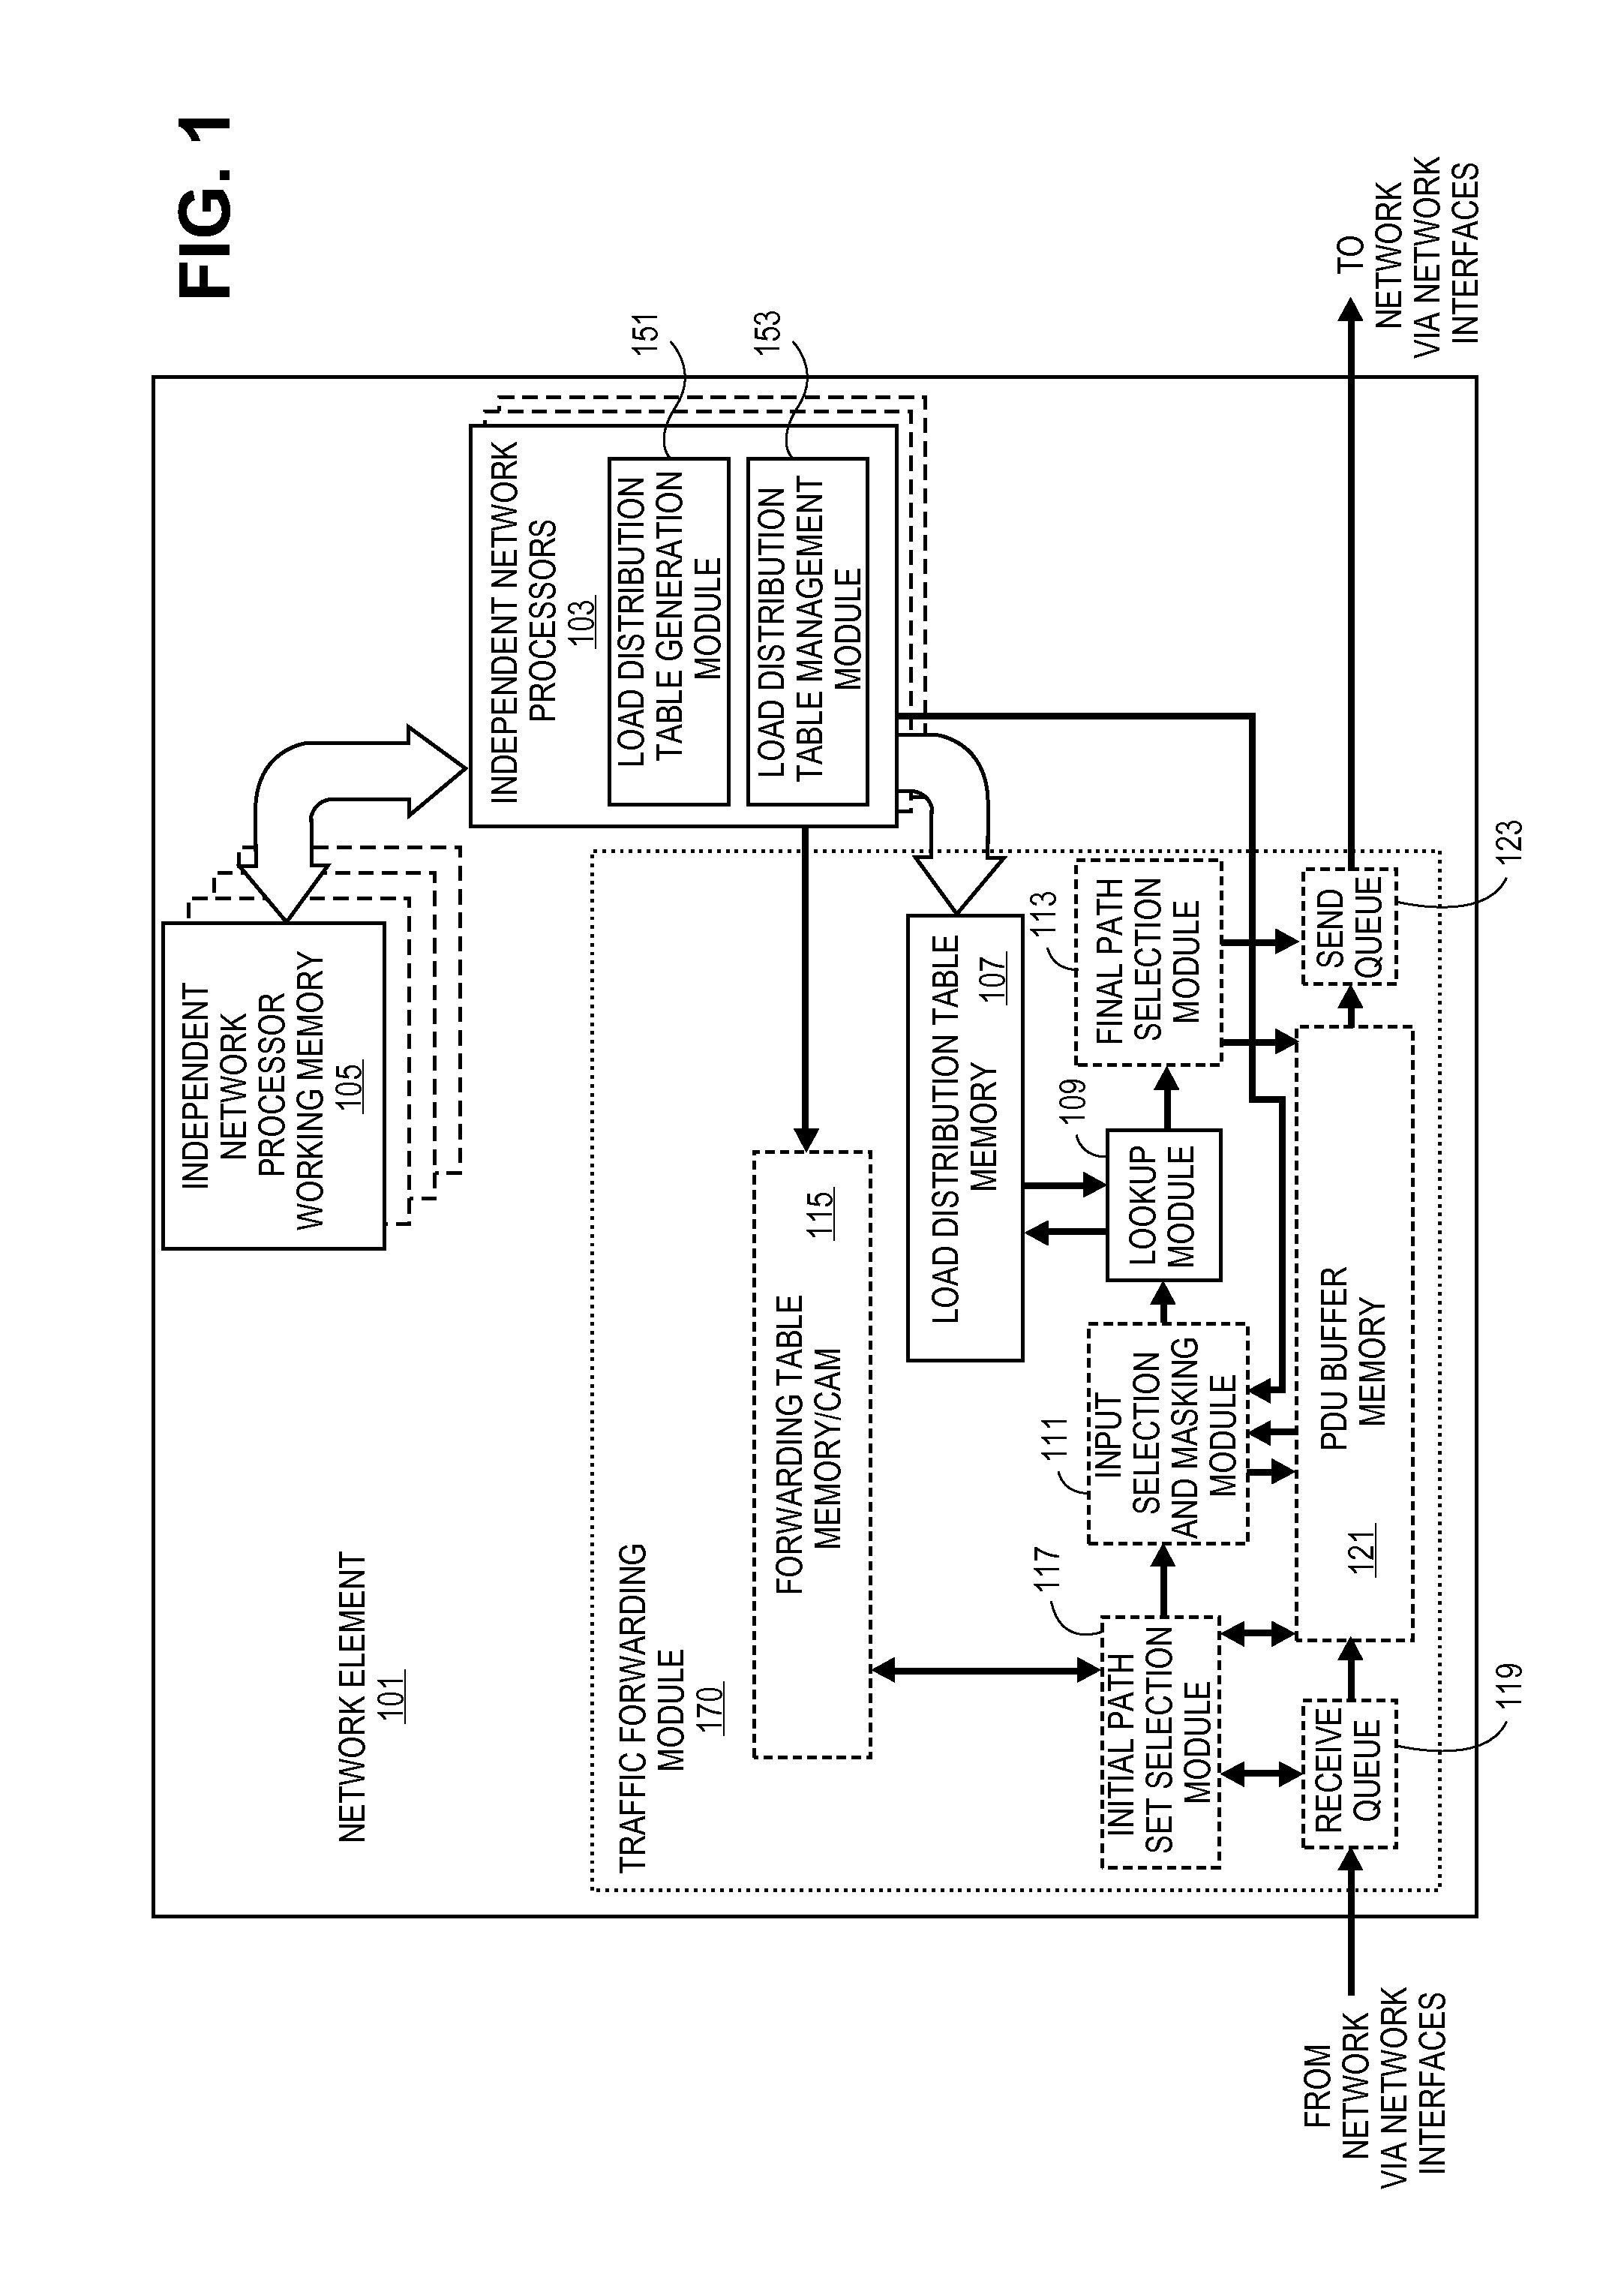 System and method for variable-size table construction applied to a table-lookup approach for load-spreading in forwarding data in a network